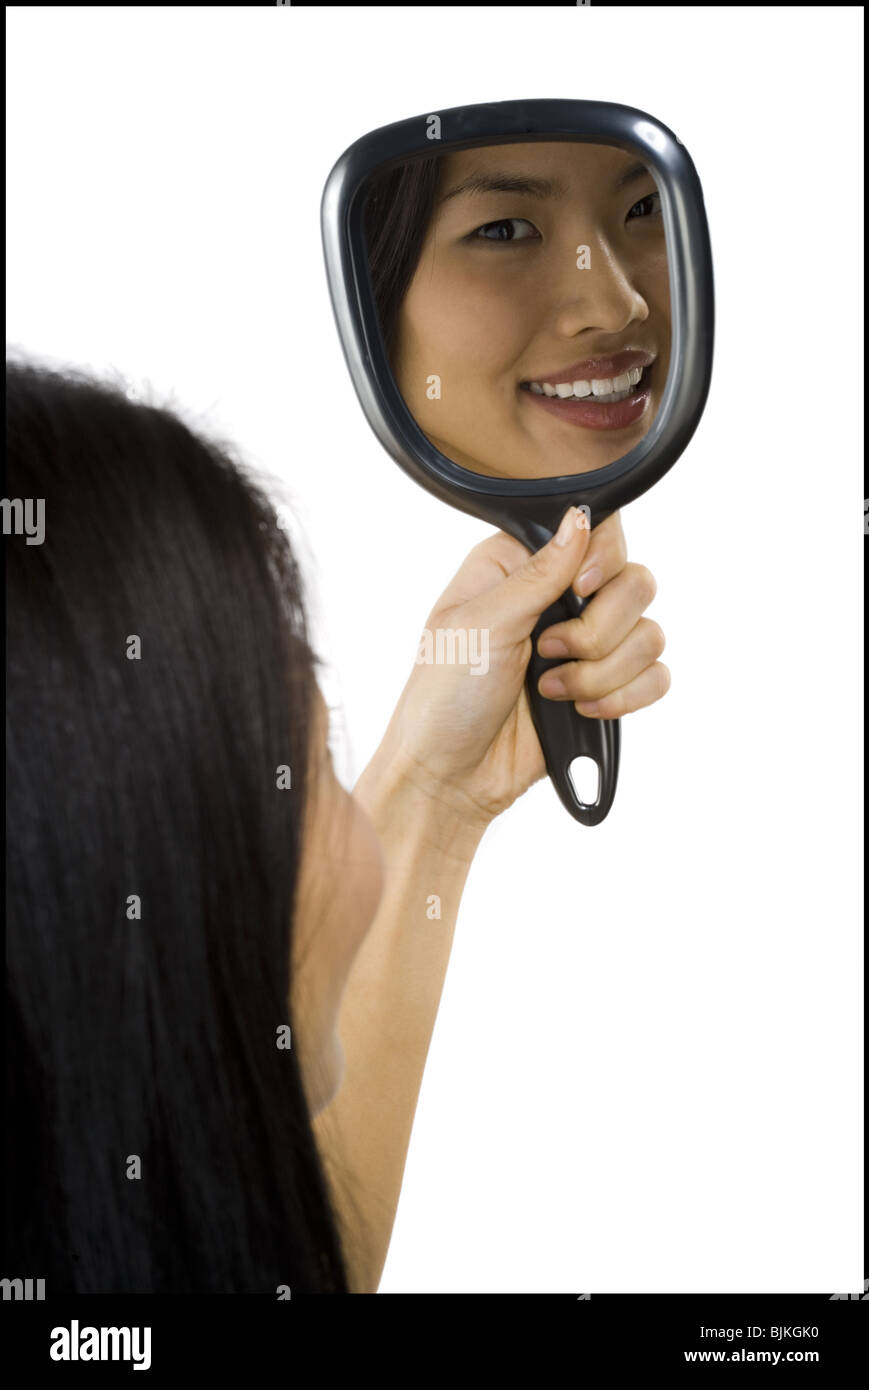 Reflection of woman in hand mirror Stock Photo